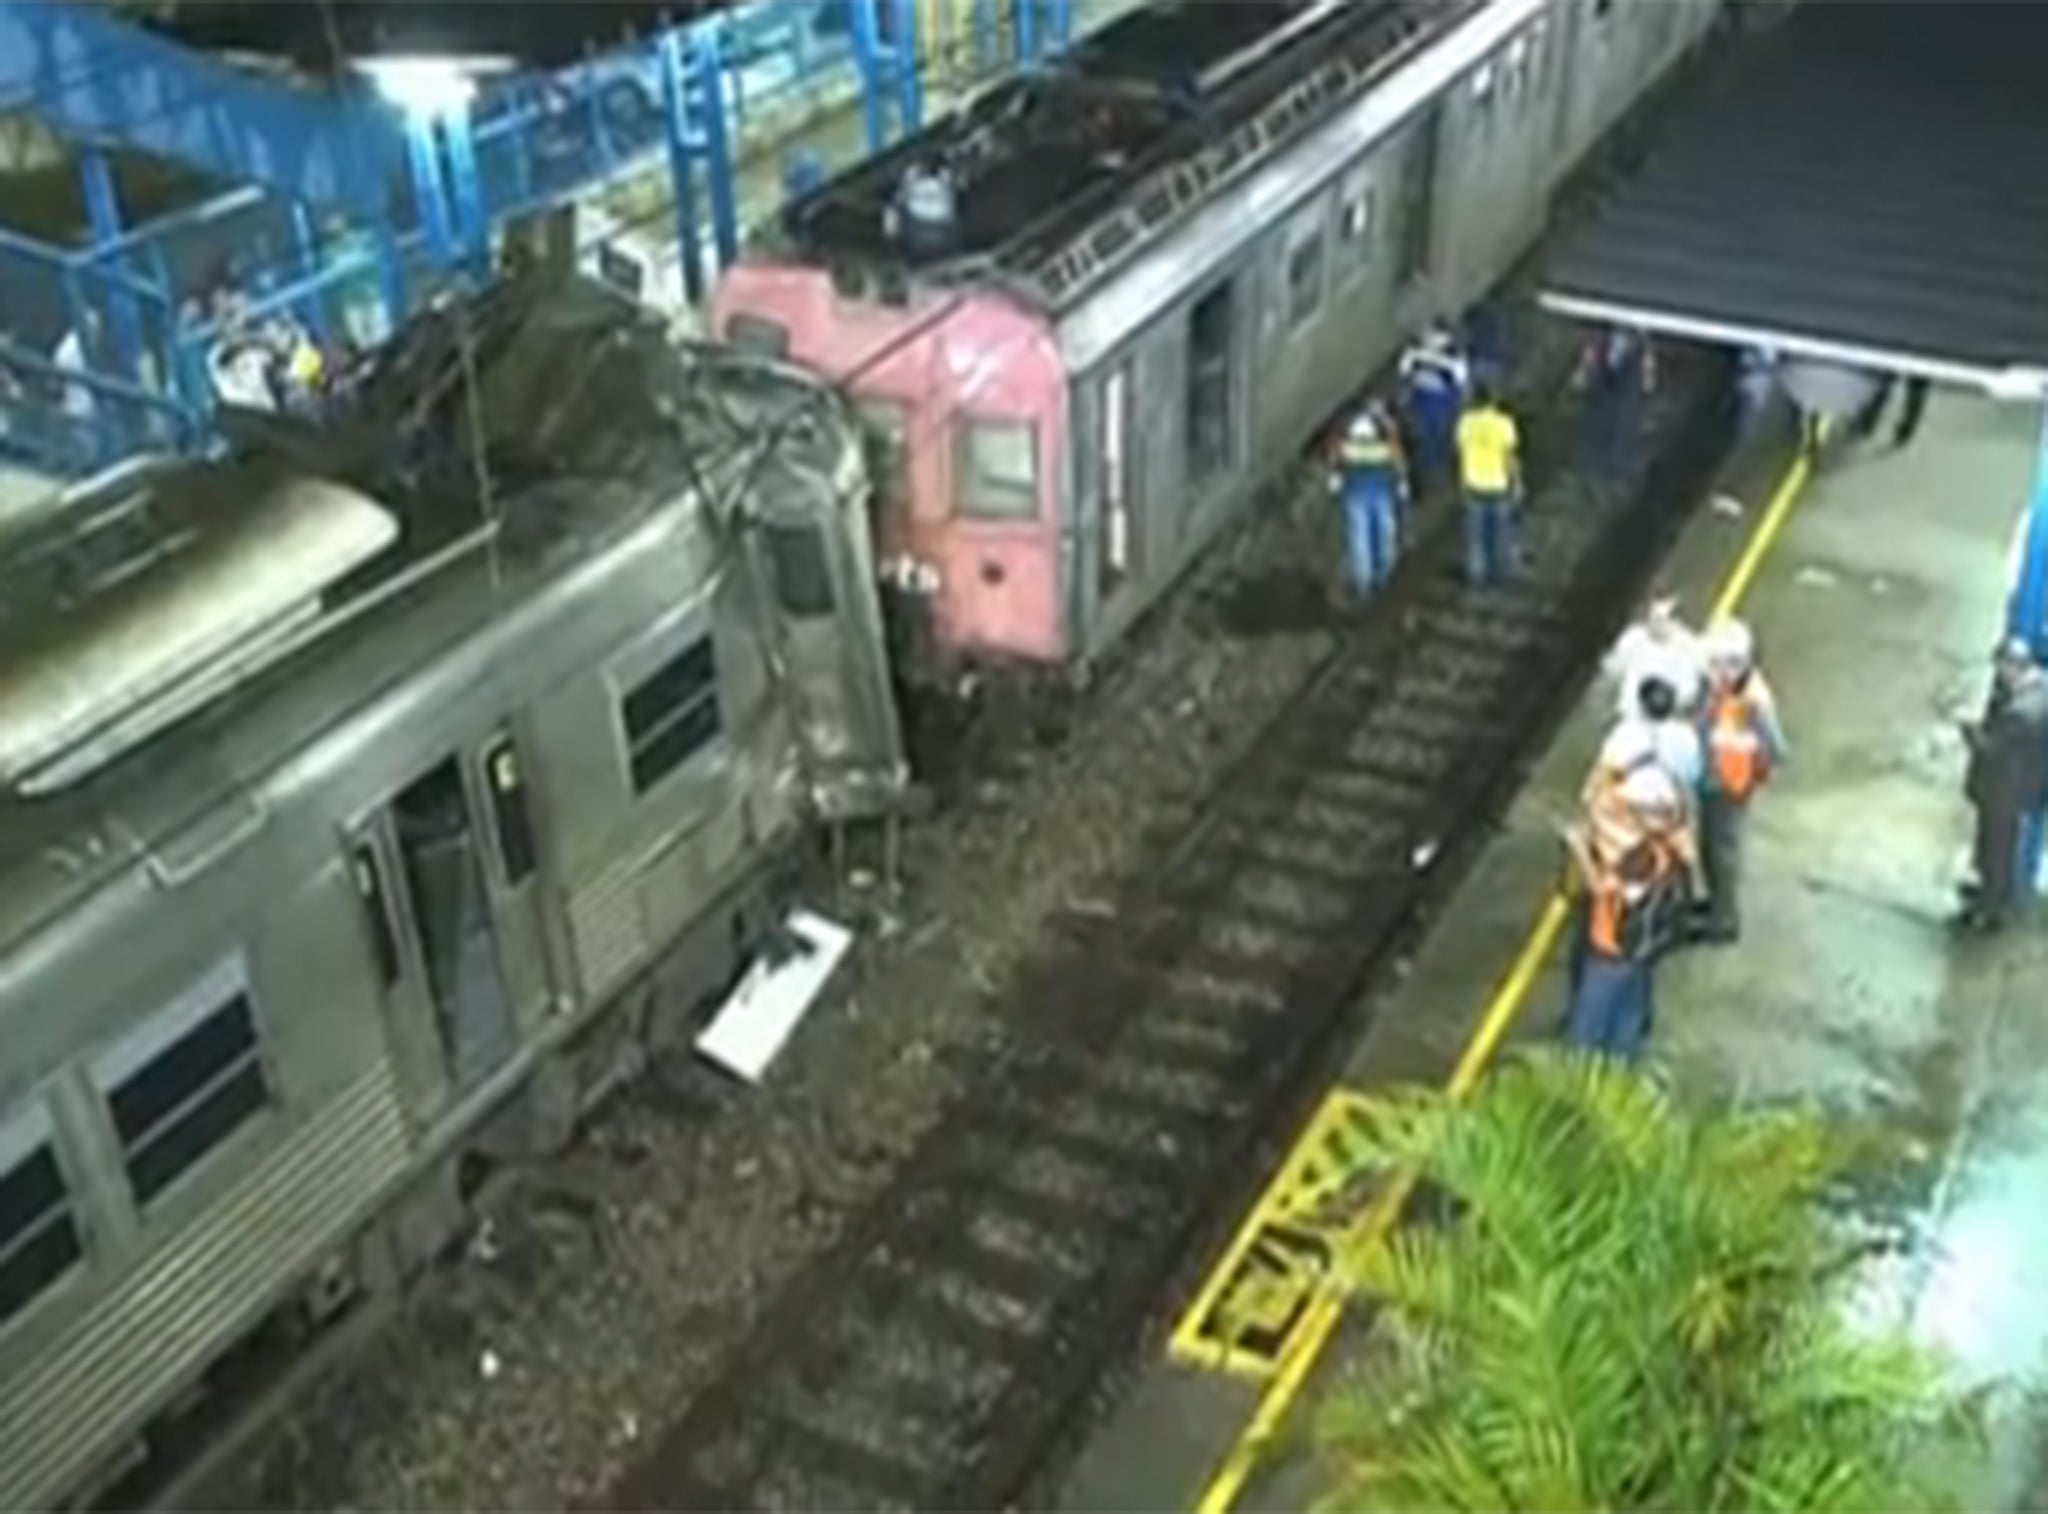 Brazil Train Collision At Least 220 Injured As Two Passenger Trains Crash The Independent